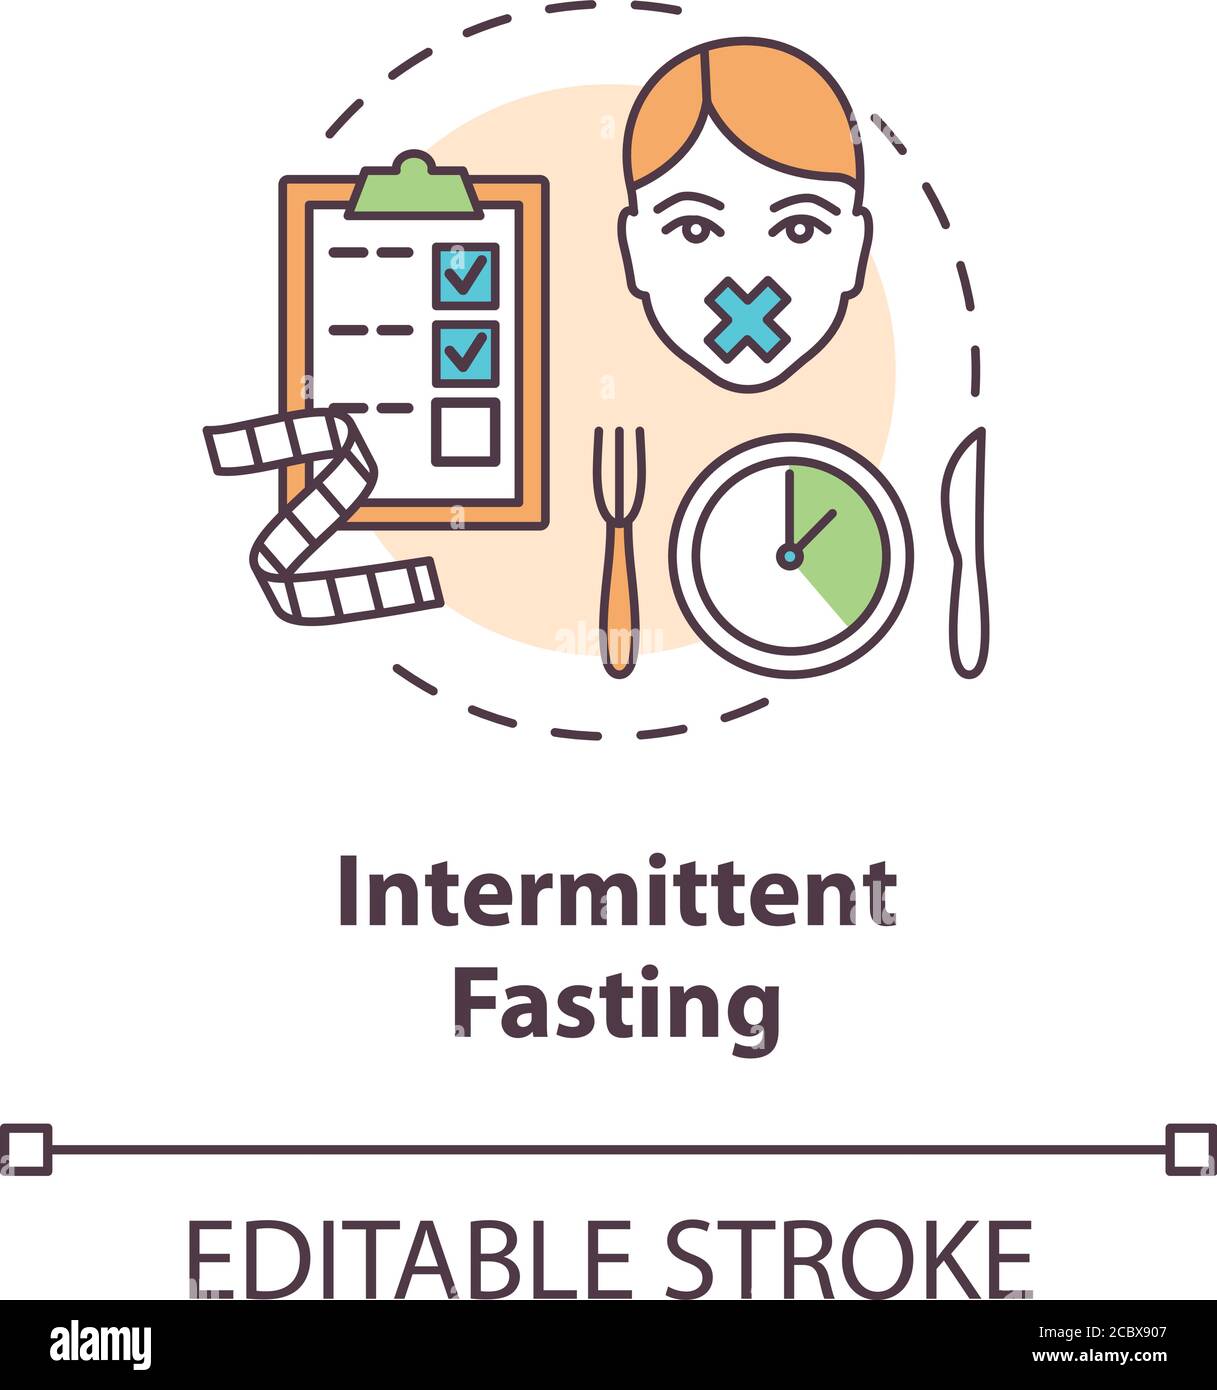 Intermittent fasting concept icon. Biohacking, nutrition management idea thin line illustration. Body hacking, dieting. Limiting meal time. Vector iso Stock Vector